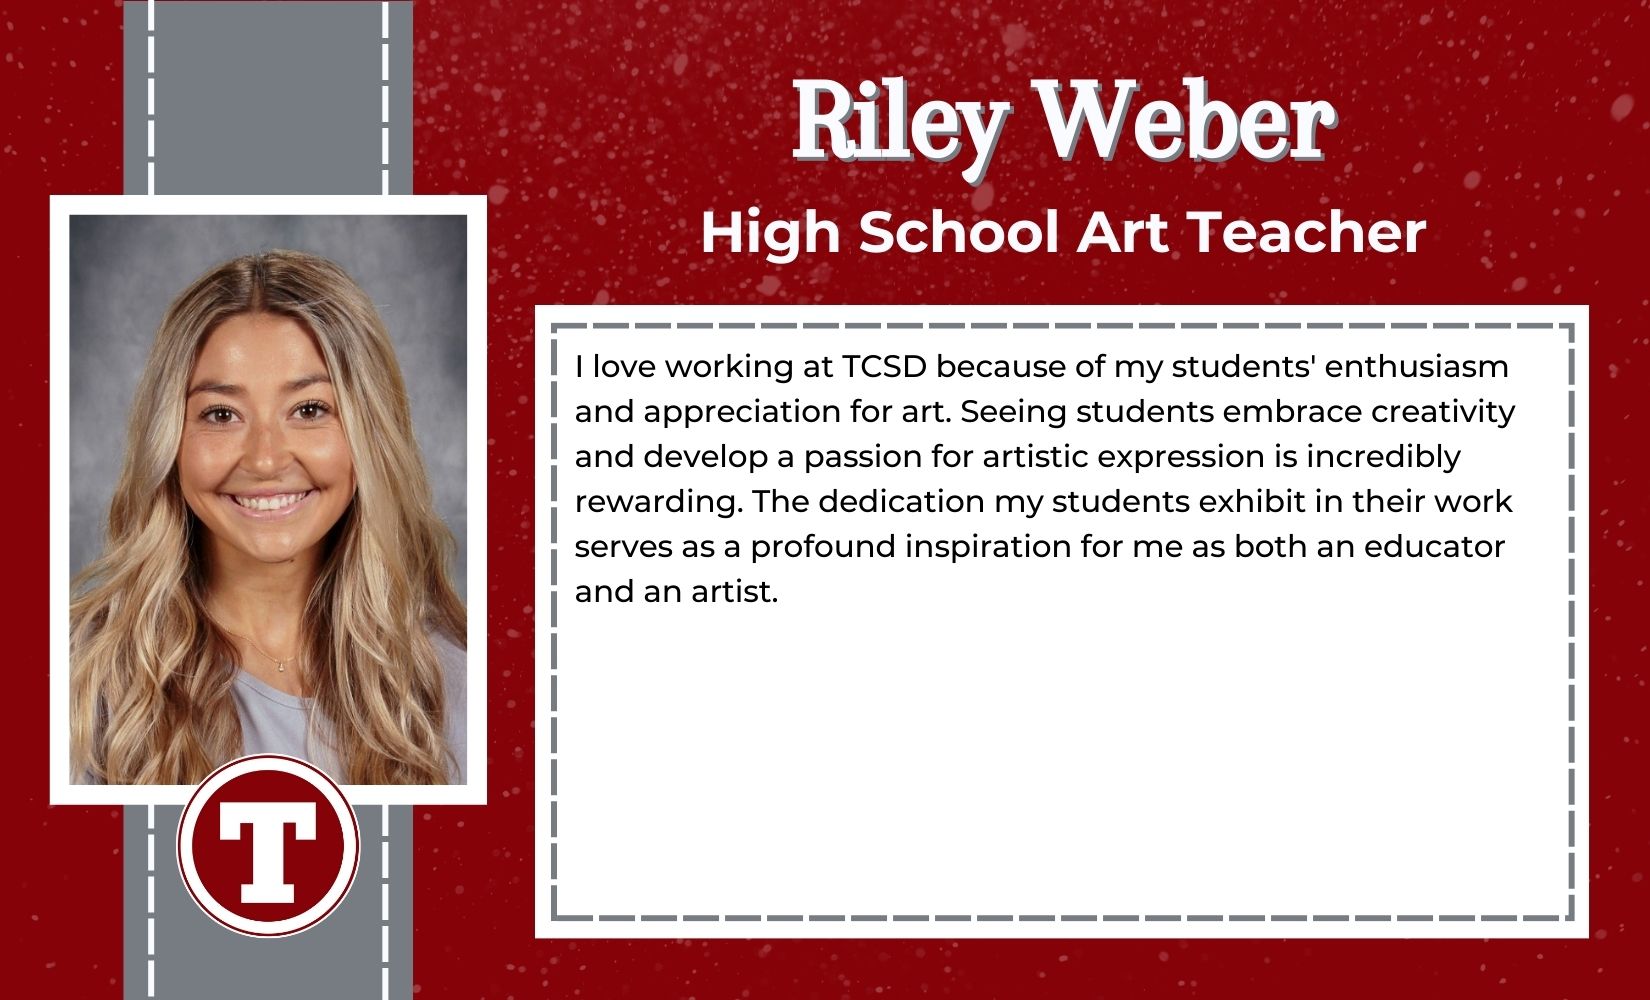 Riley Weber, High School Art Teacher, I love working at TCSD because of my students' enthusiasm and appreciation for art. Seeing students embrace creativity and develop a passion for artistic expression is incredibly rewarding. The dedication my students exhibit in their work serves as a profound inspiration for me as both an educator and an artist.